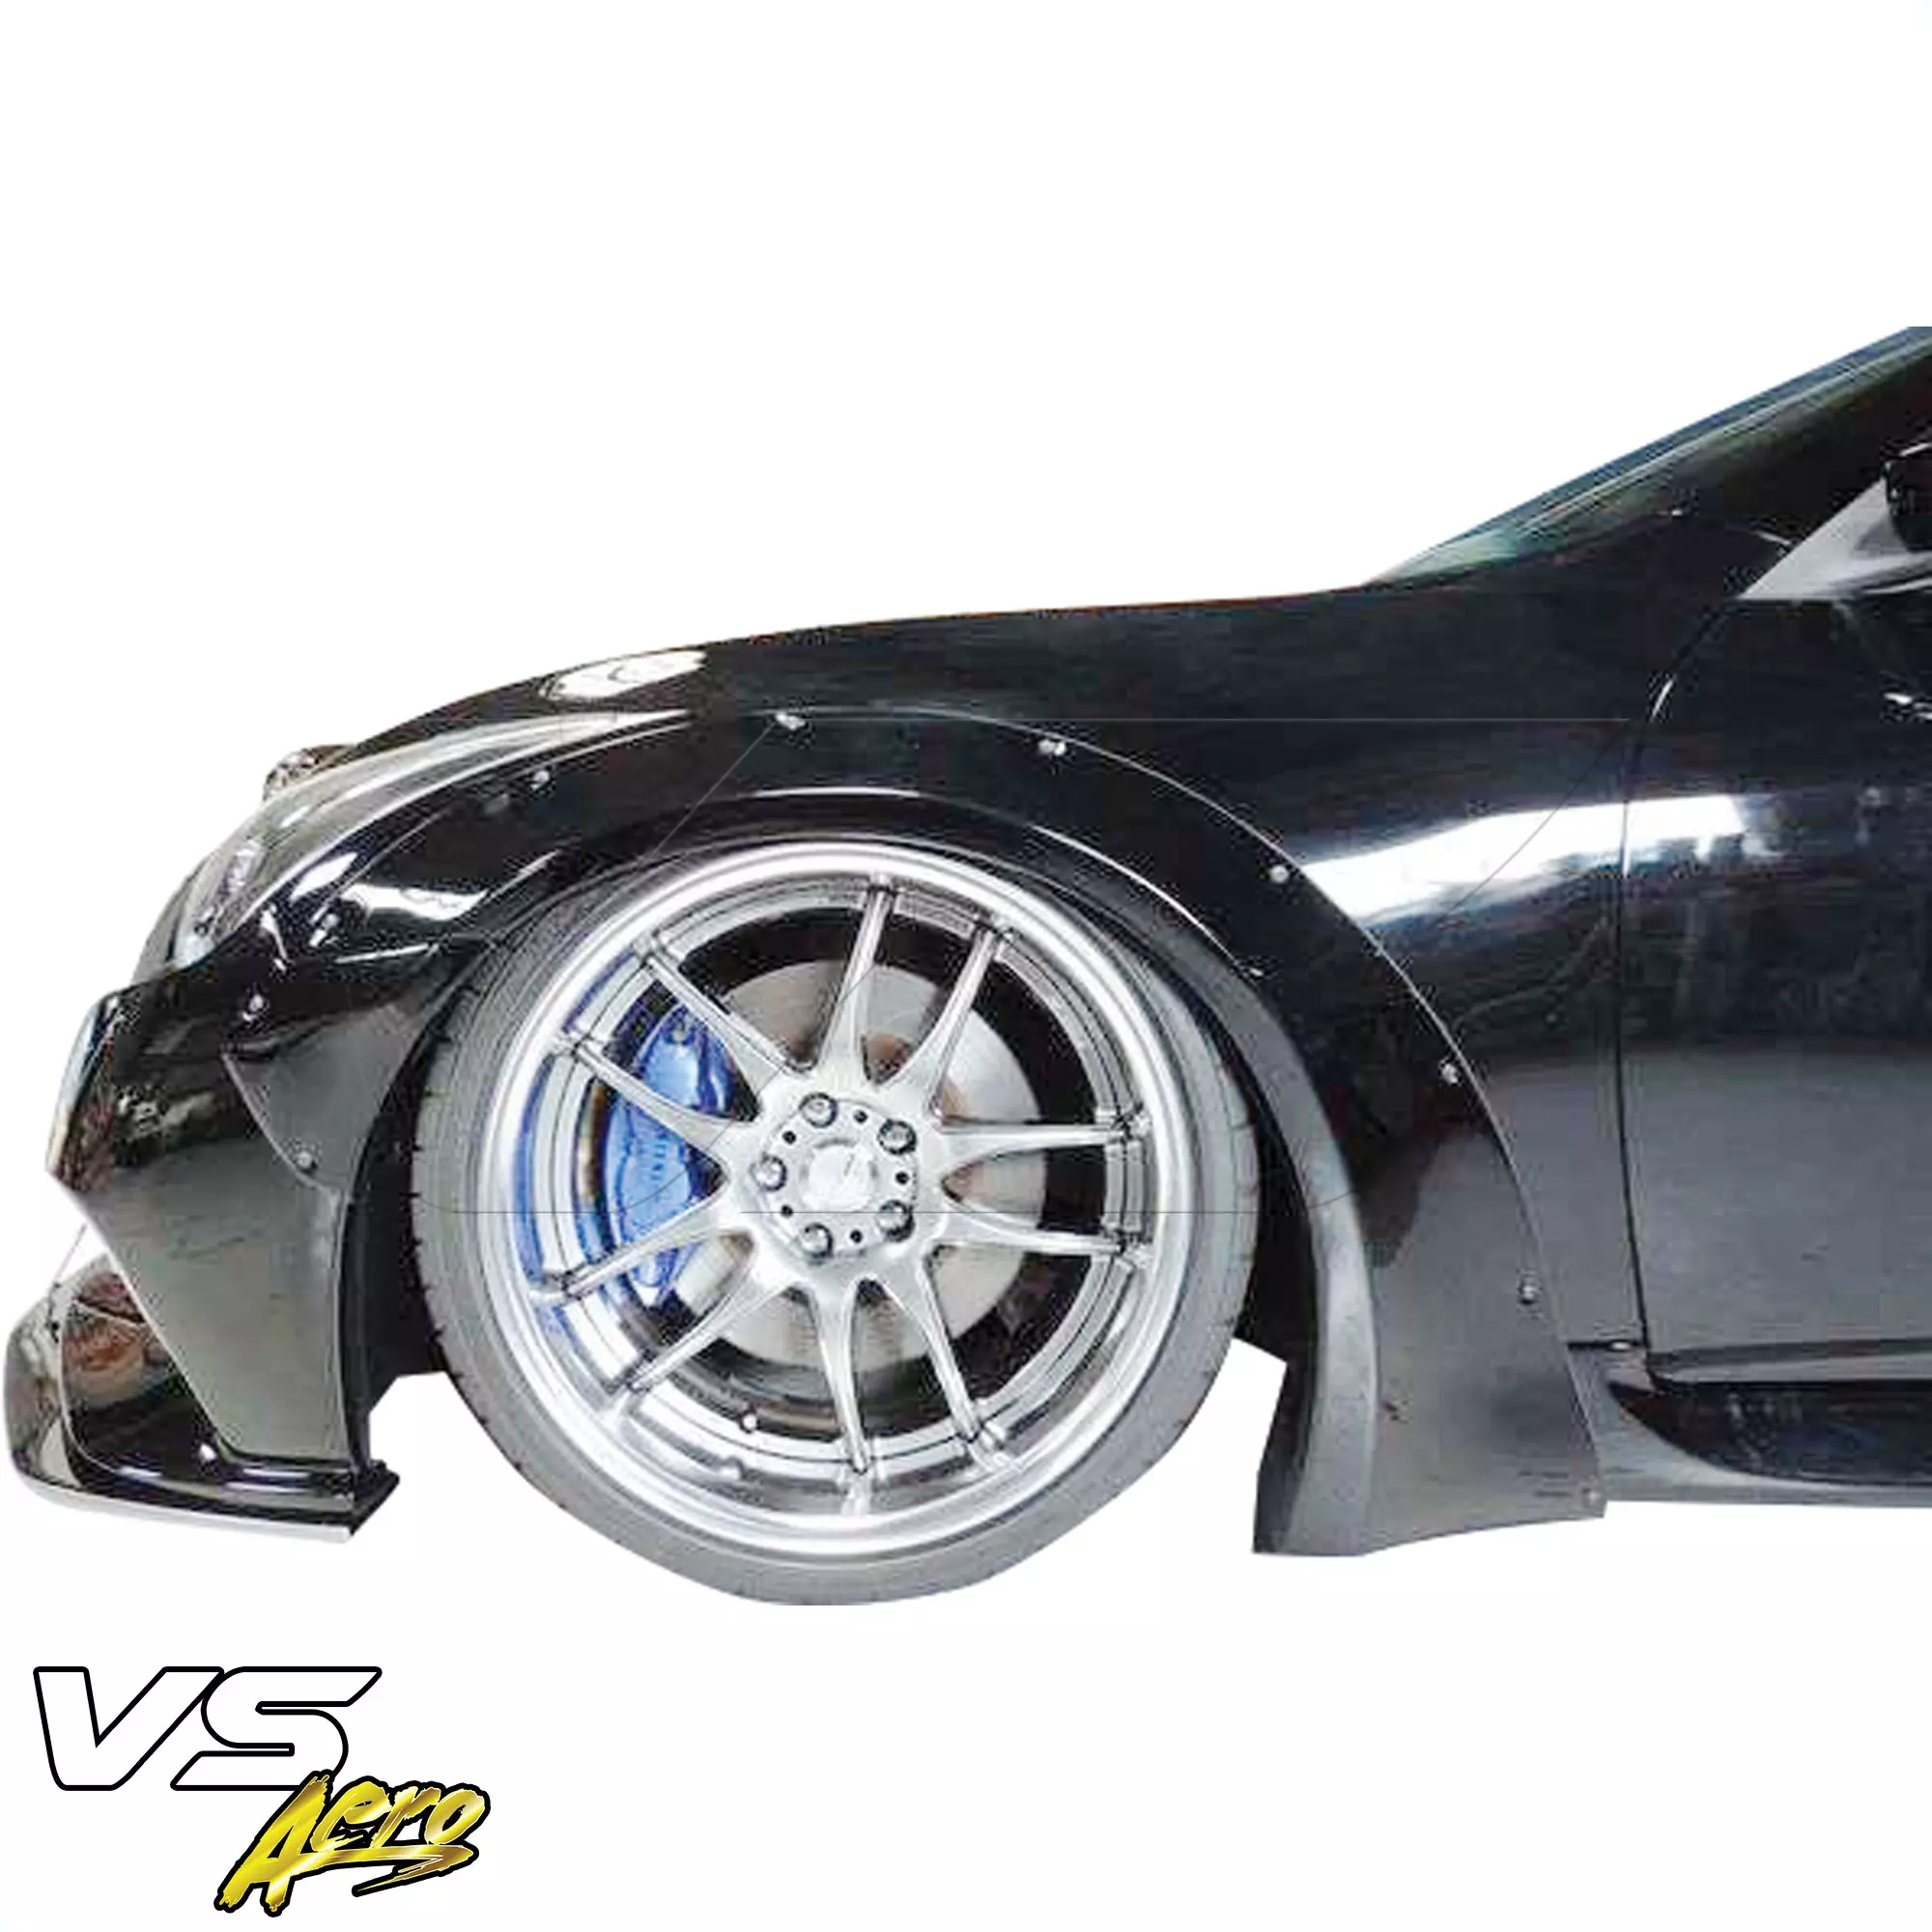 VSaero FRP LBPE Wide Body Fender Flares (front) 4pc > Infiniti G37 Coupe 2008-2015 > 2dr Coupe - Image 37